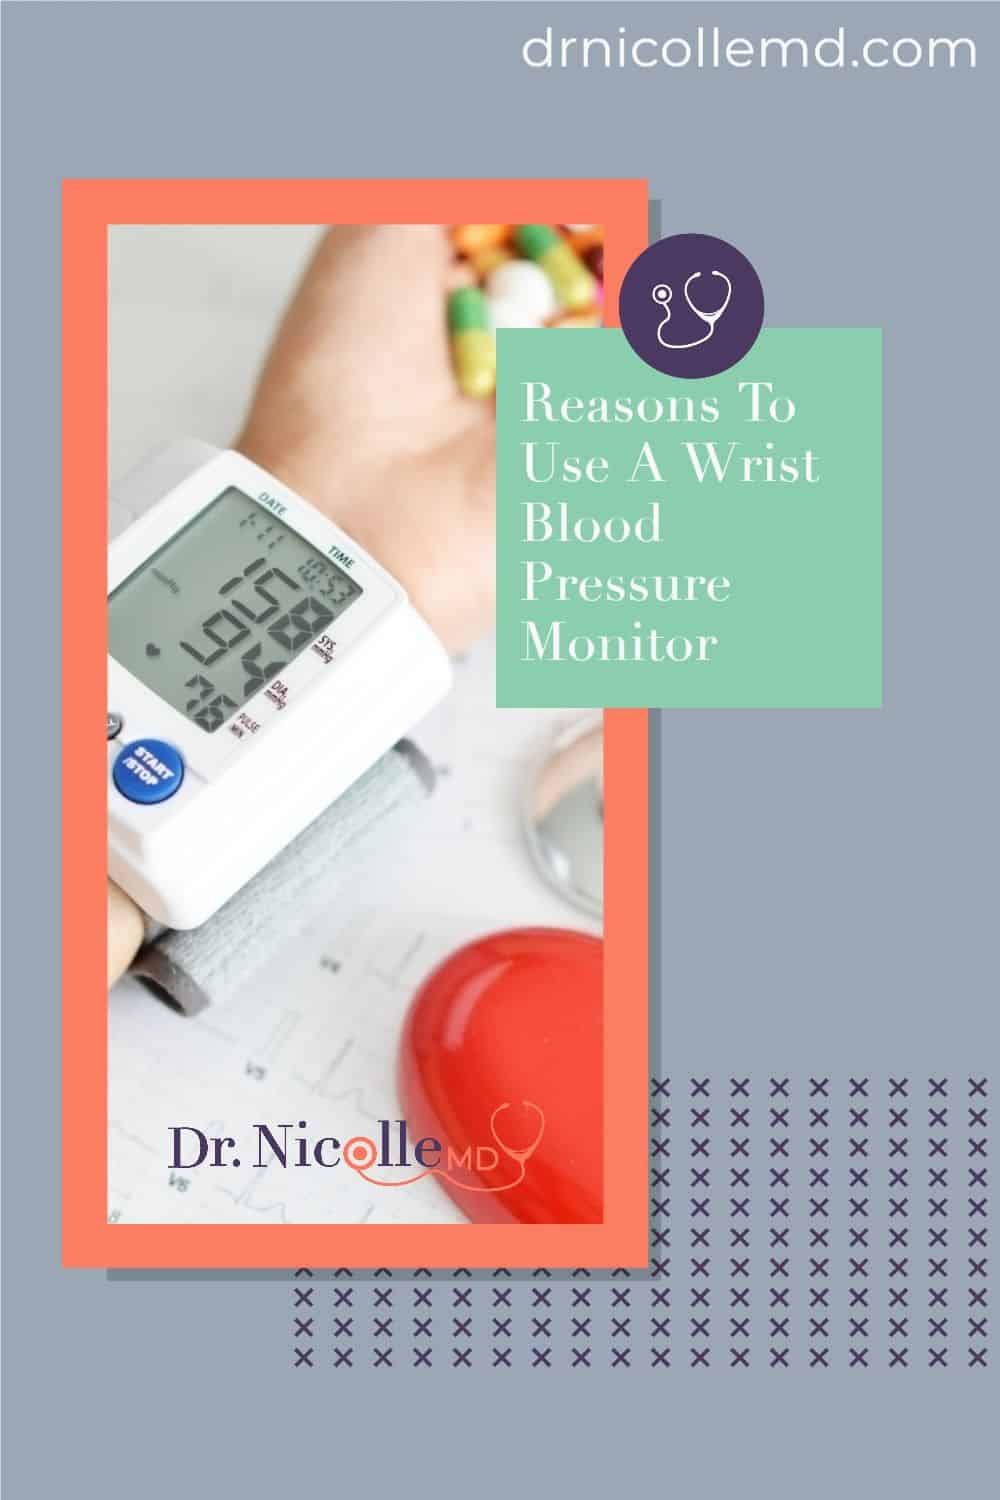 Why It Makes Sense To Use A Wrist Blood Pressure Monitor